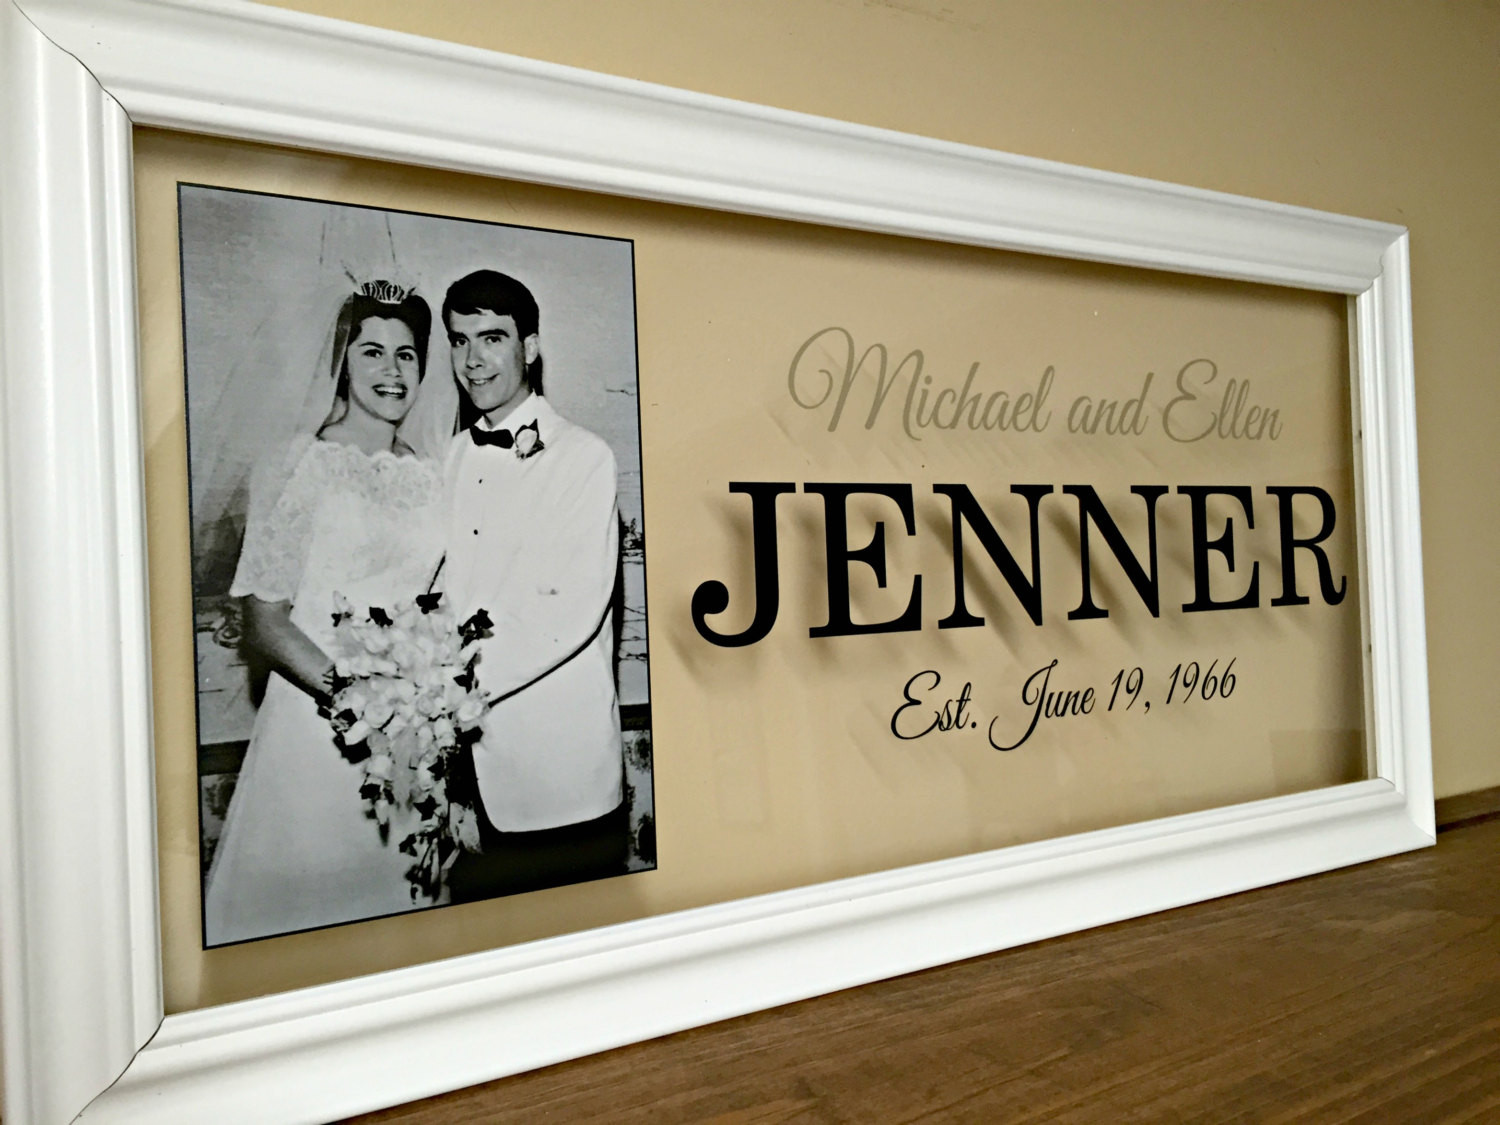 Gift Ideas For Parents 50Th Wedding Anniversary
 20 Best 50th Wedding Anniversary Gift Ideas for Parents